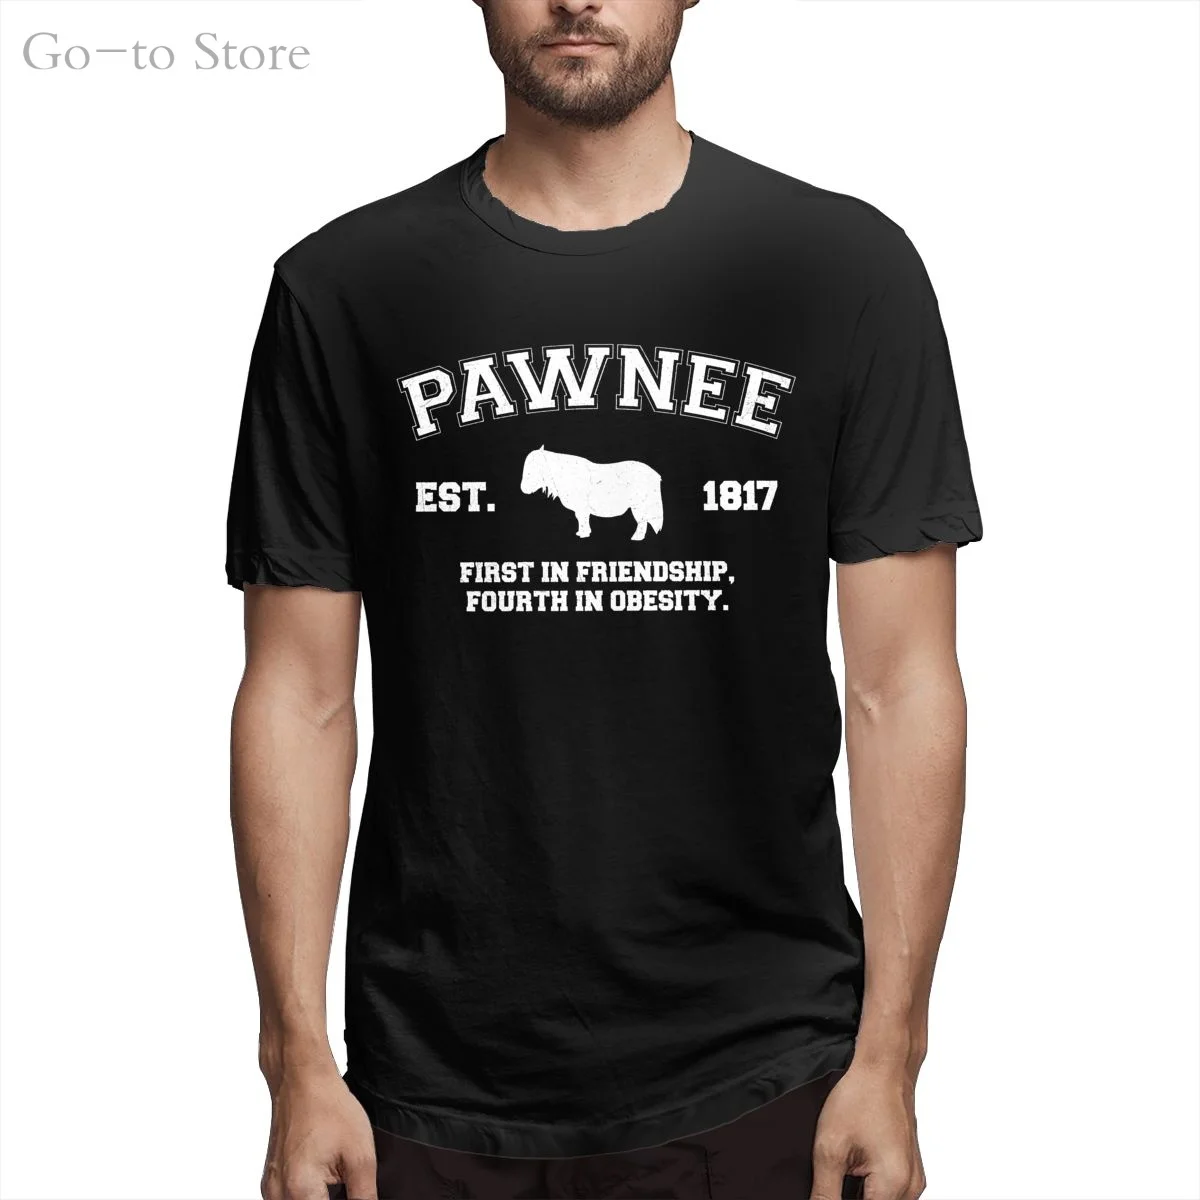 

Pawnee Athletic Cool And Funny Short Sleeved Casual Fashion Cotton T-shirt Tee Shirts